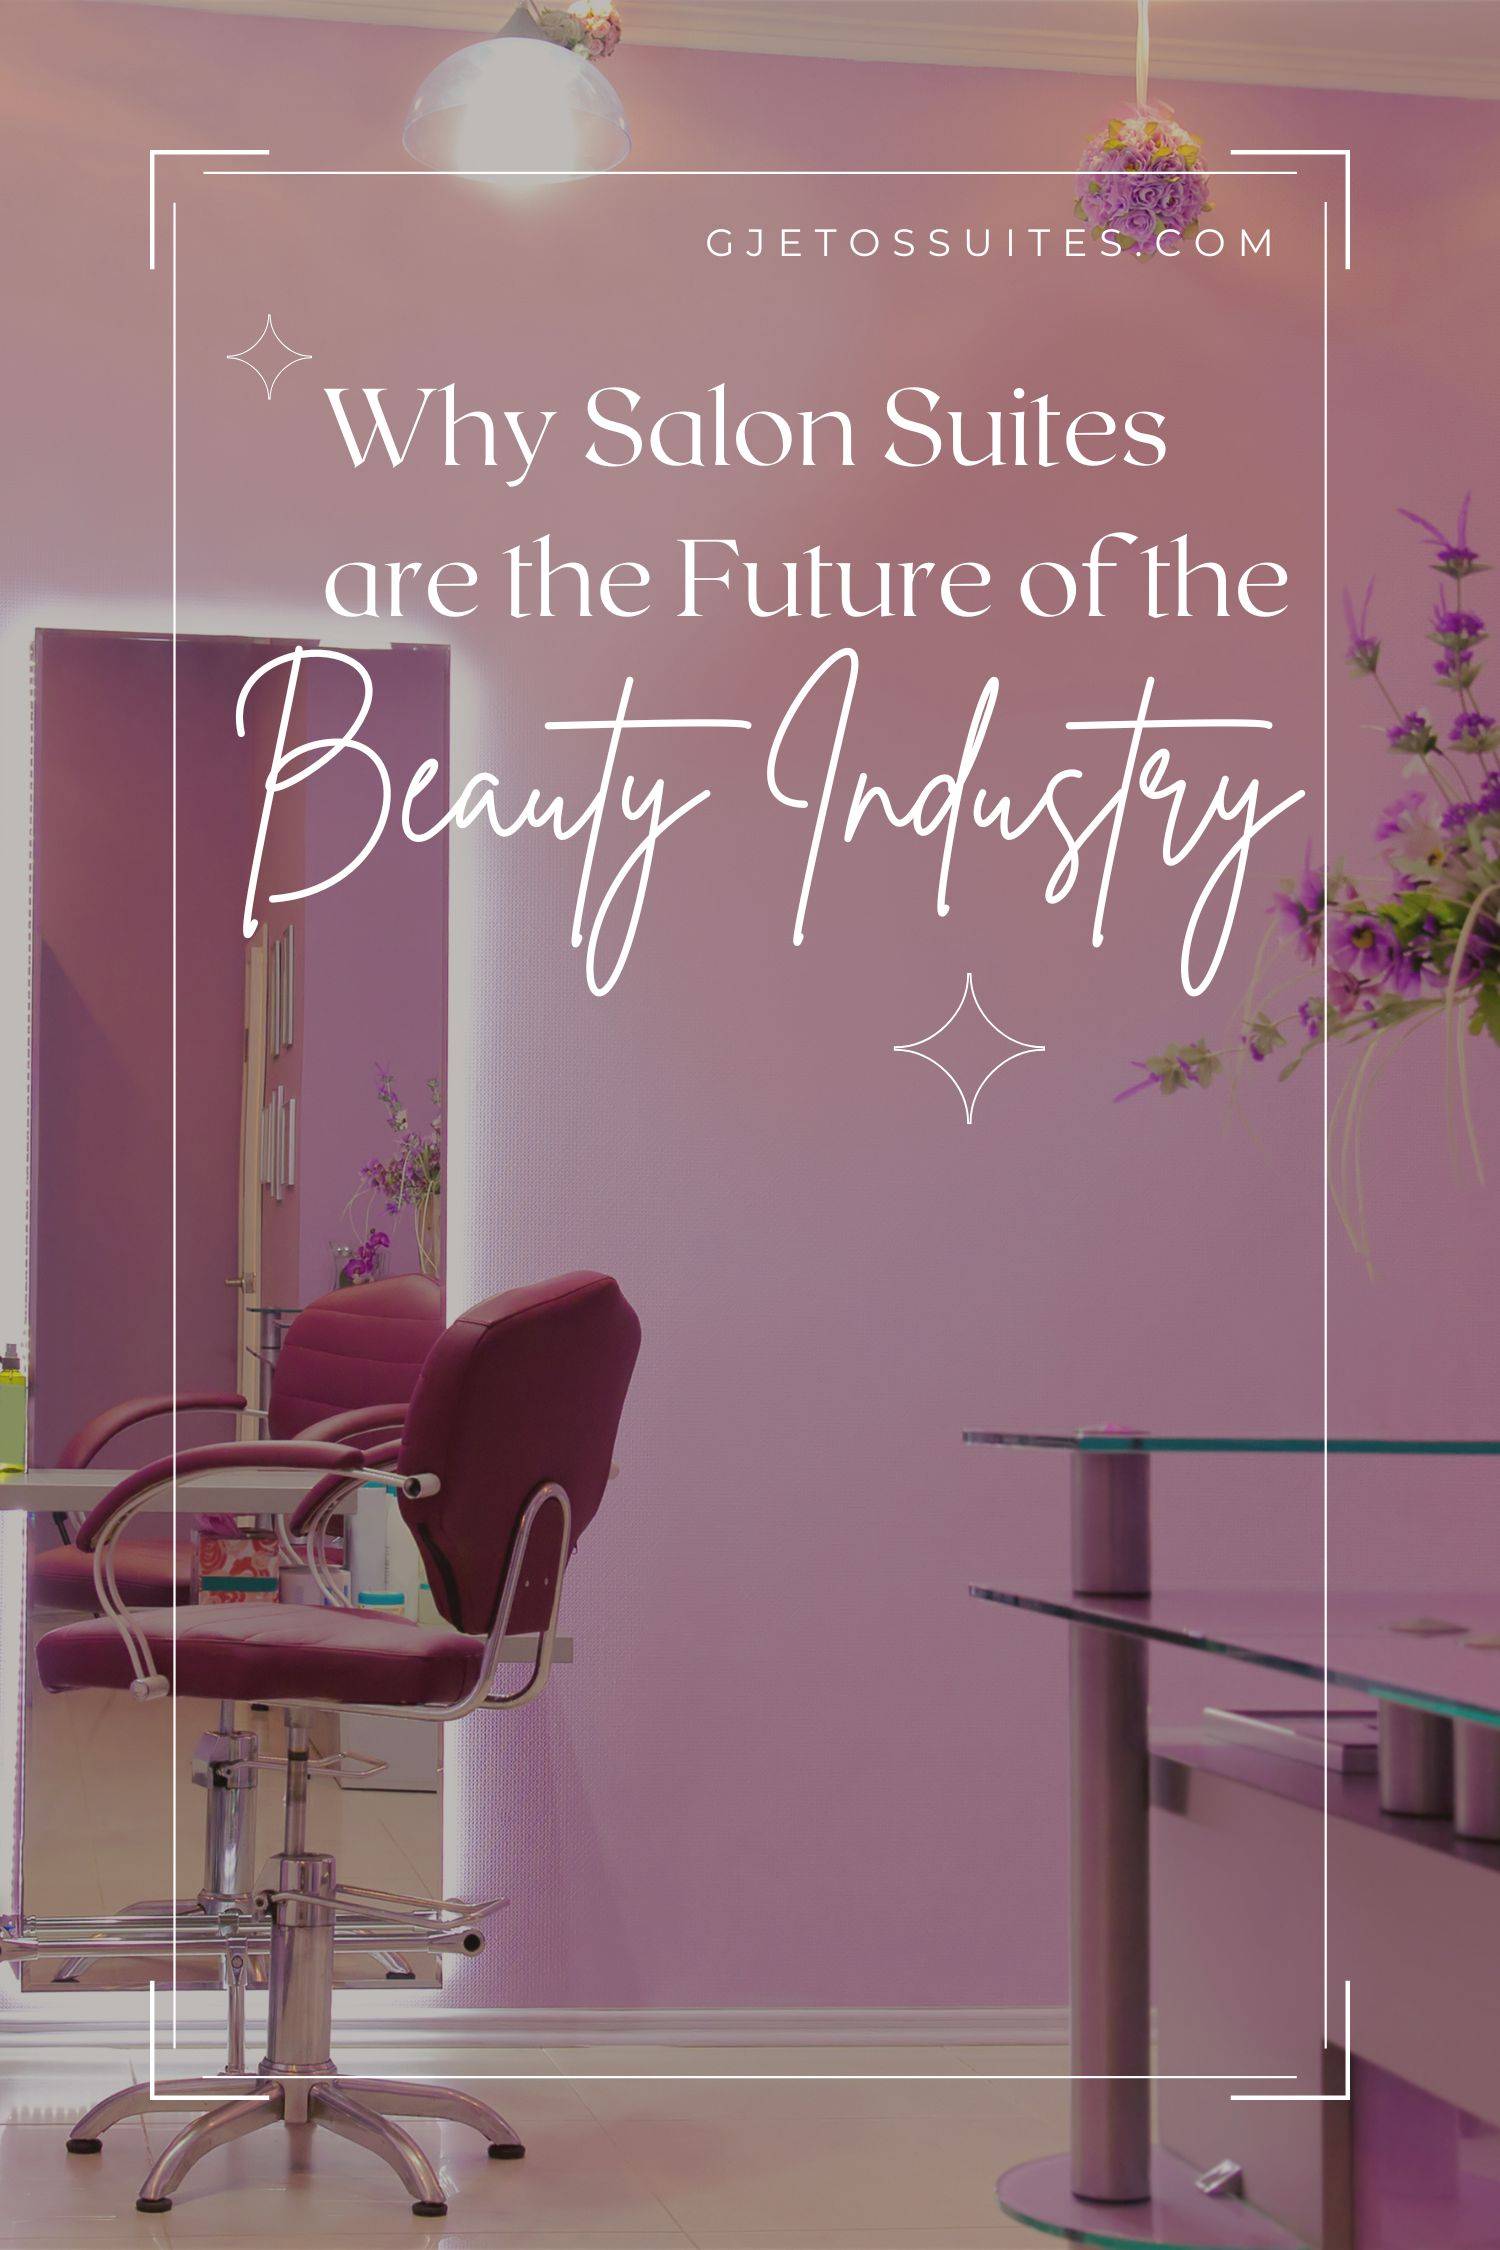 Why Salon Suites are the Future of the Beauty Industry